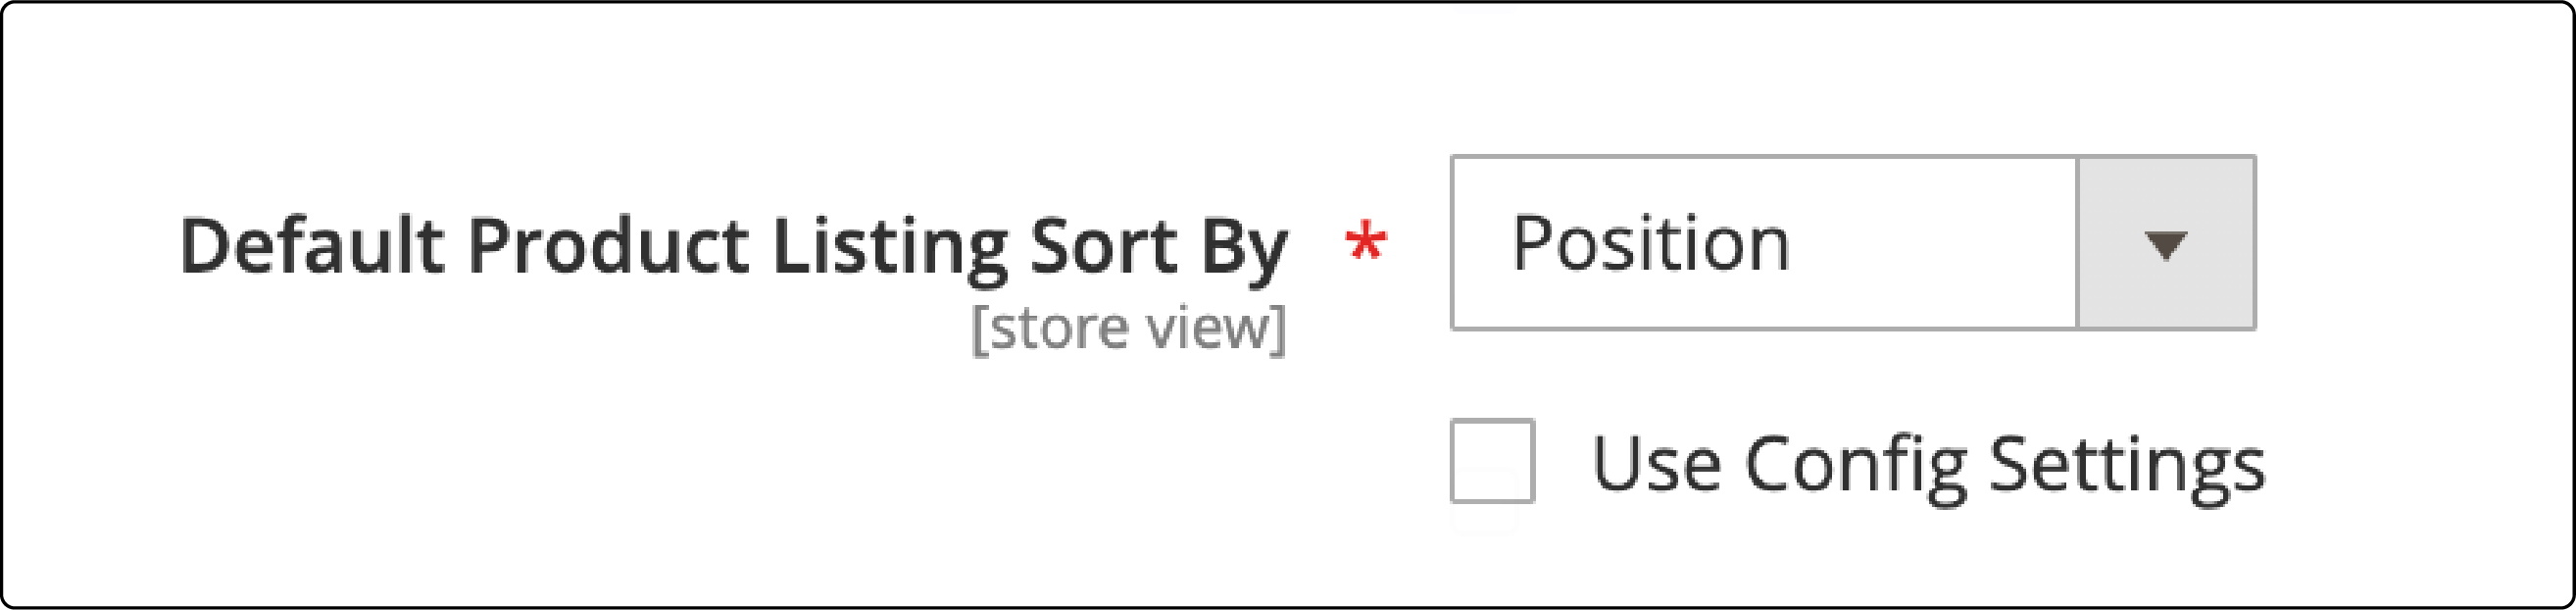 Guide on modifying the default sorting option in Magento 2 for enhanced product display